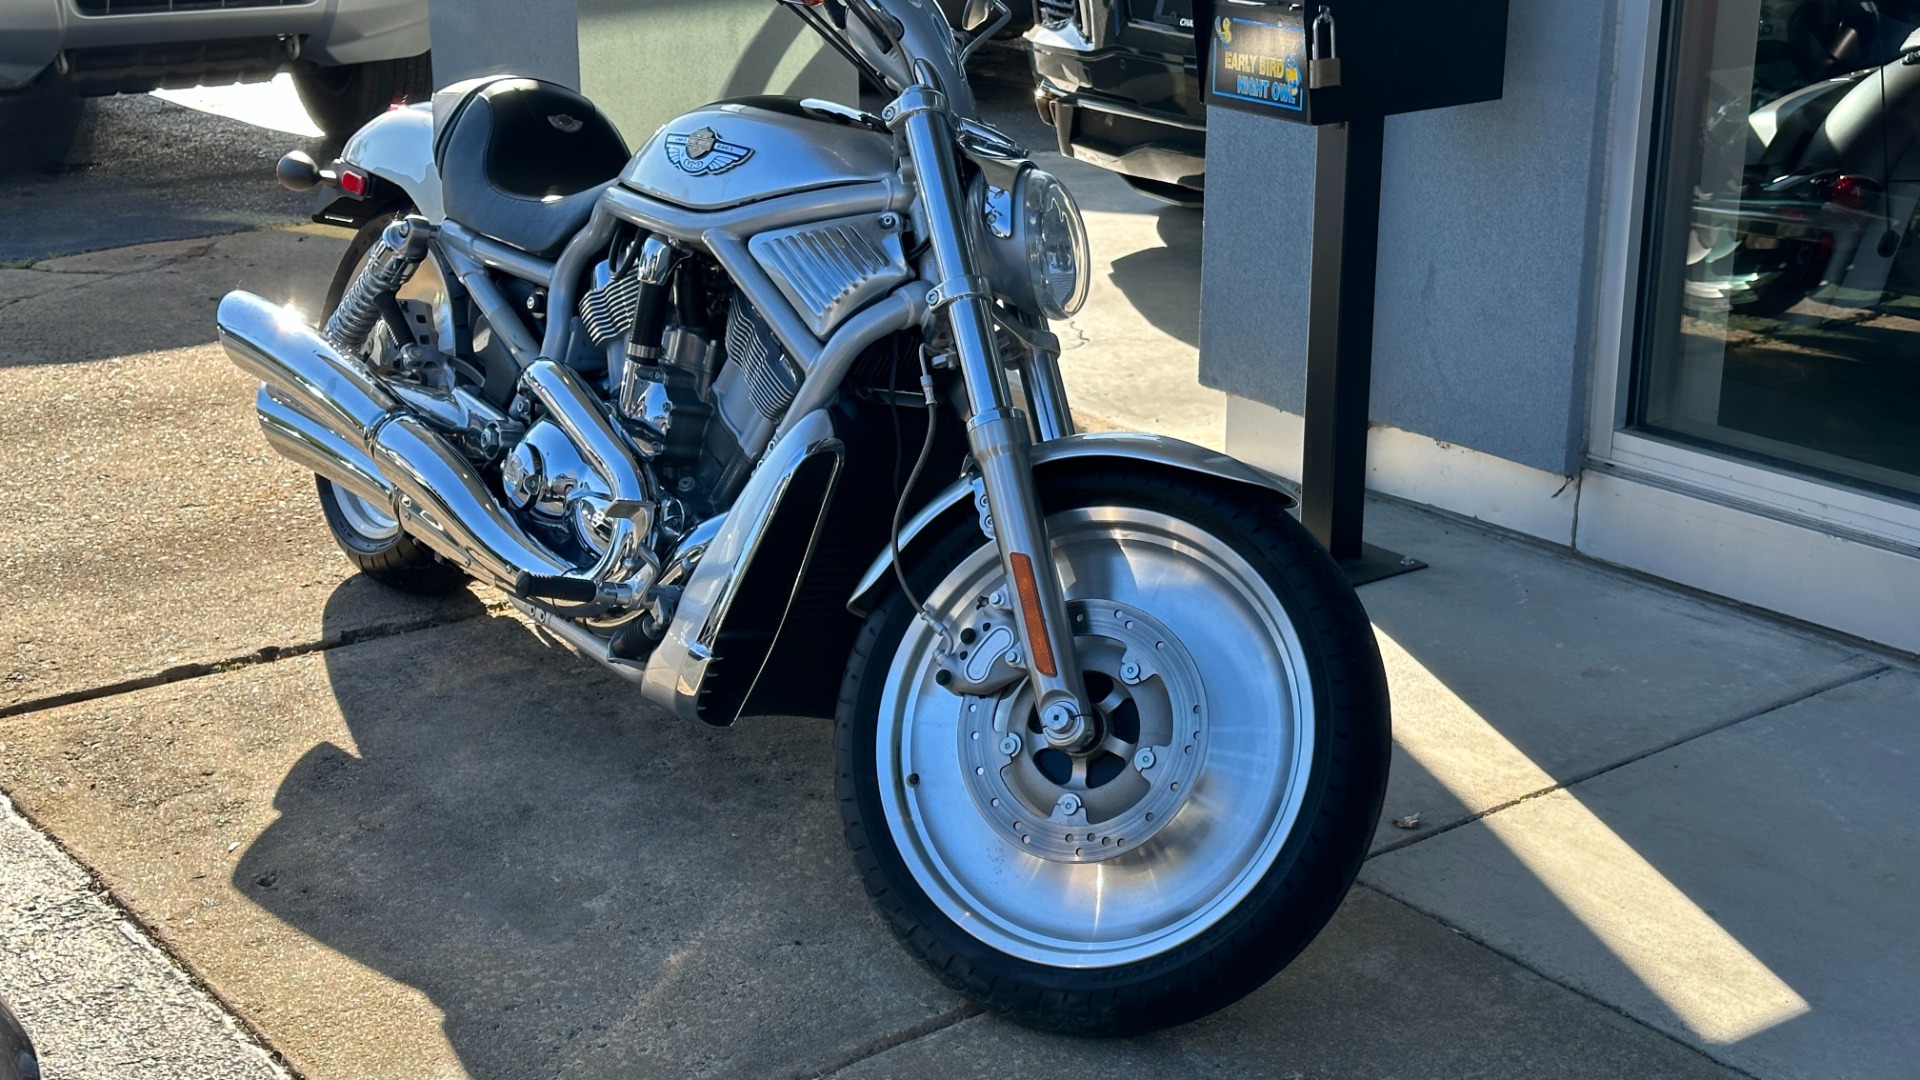 Used 2003 Harley Davidson V Rod ANNIVERSARY EDITION / 1130CC ENGINE / BREMBO BRAKES / VORTEX AIR SCOOPS for sale $7,995 at Formula Imports in Charlotte NC 28227 63